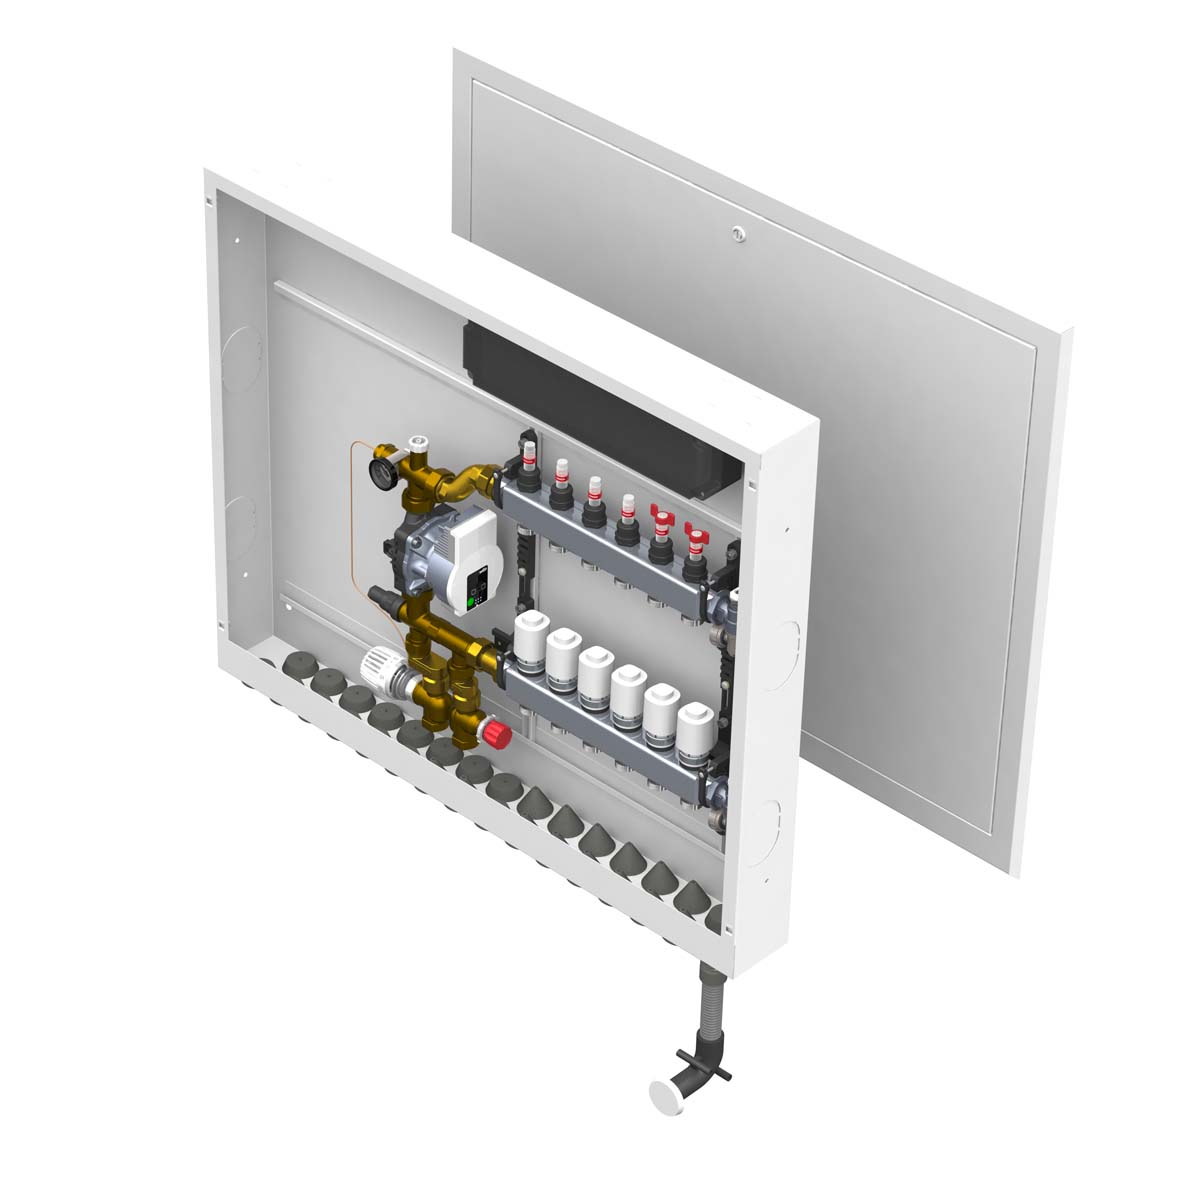 Featured image for “Preassembled manifold cabinet with shunt for in wall mounting”